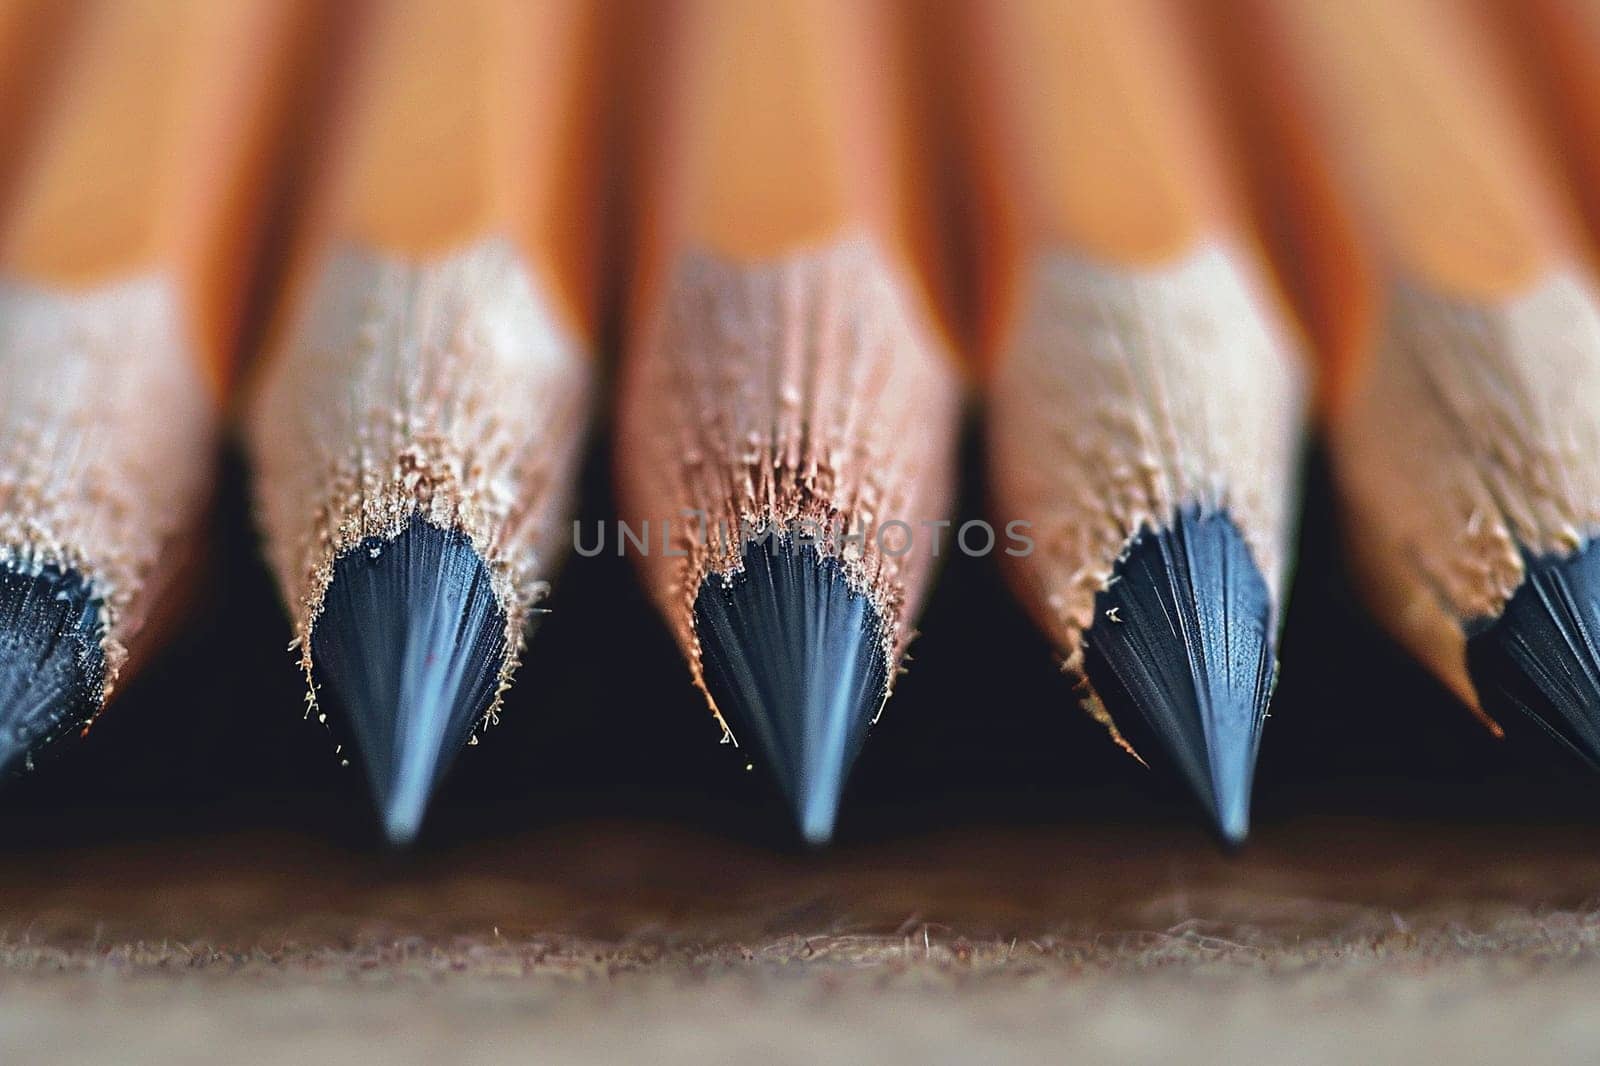 Three simple pencils, with well-sharpened leads, close-up. Generated by artificial intelligence by Vovmar